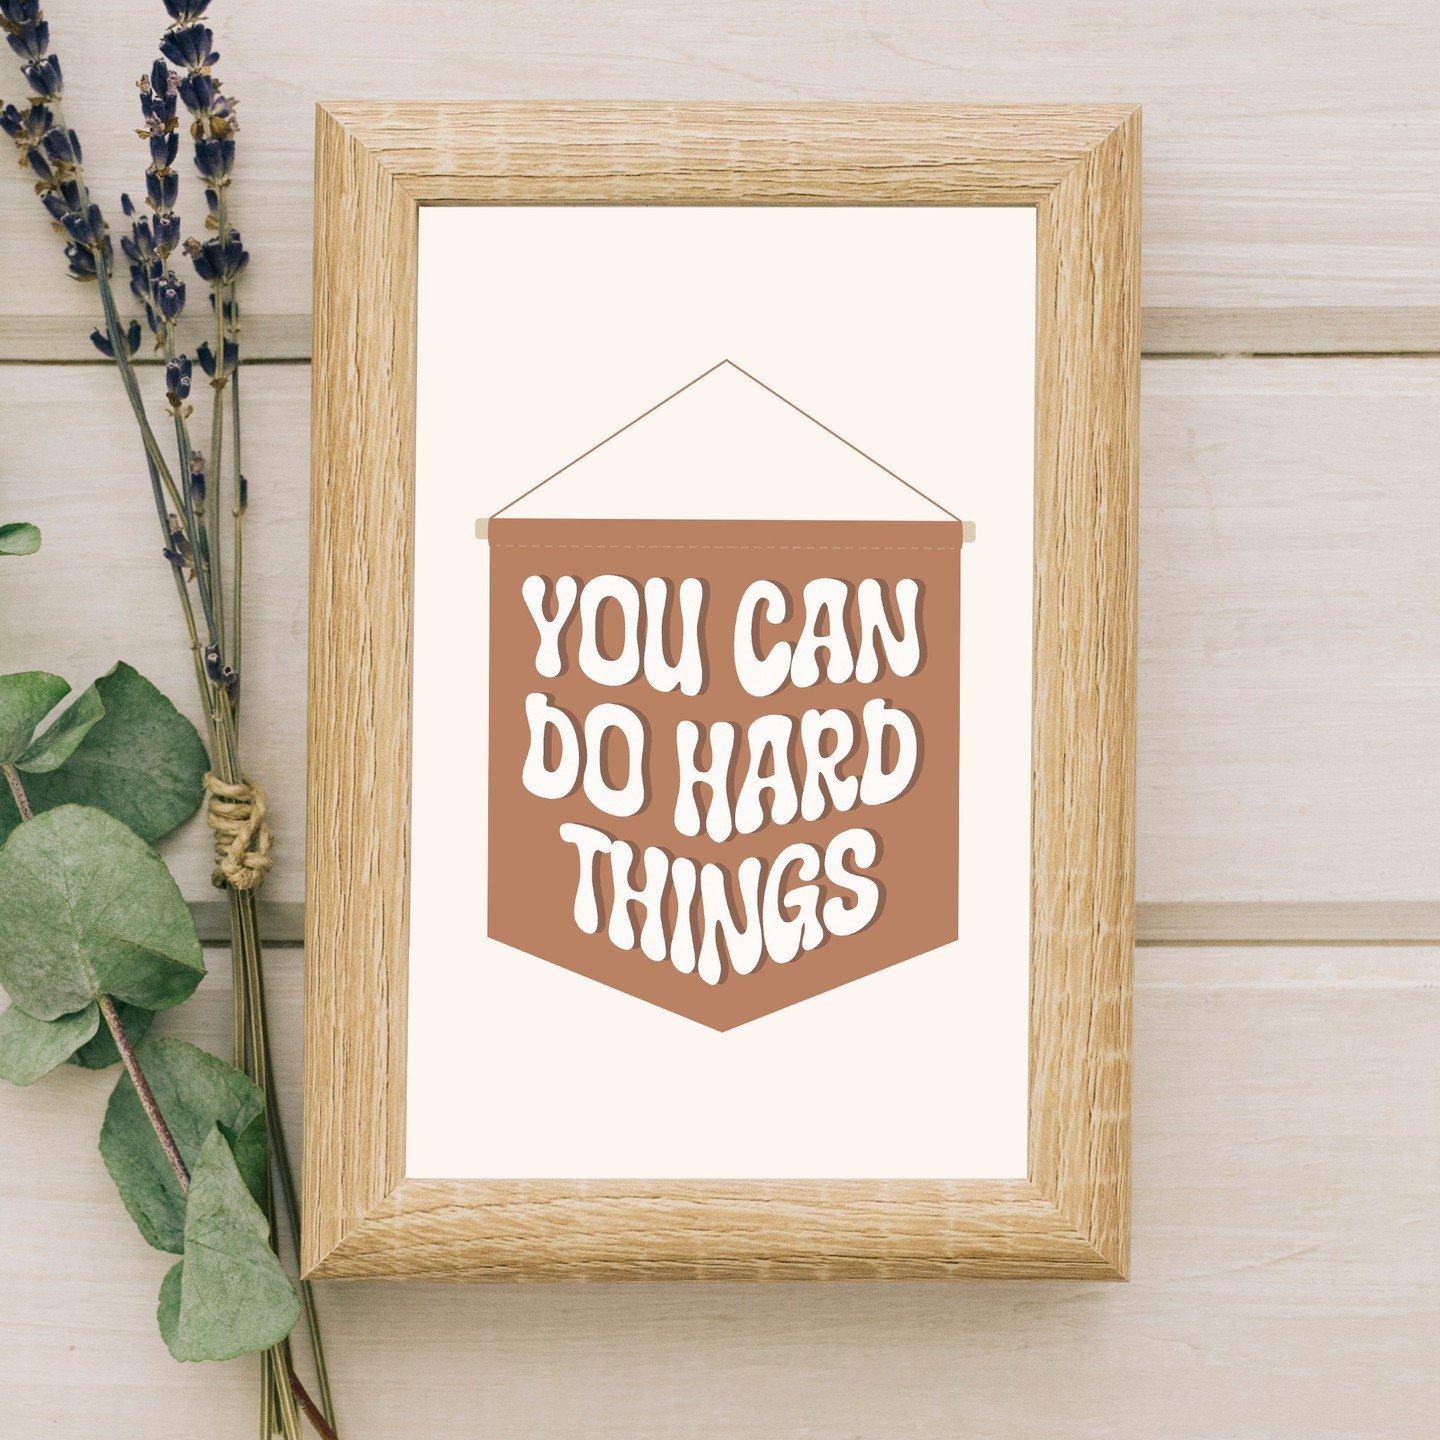 It's a brand new week and I'm here to remind you of something incredibly important: You can do hard things. 💪✨

Life throws challenges our way, big and small, but every time you overcome one, you become stronger, wiser, and more resilient. 💫 Whethe